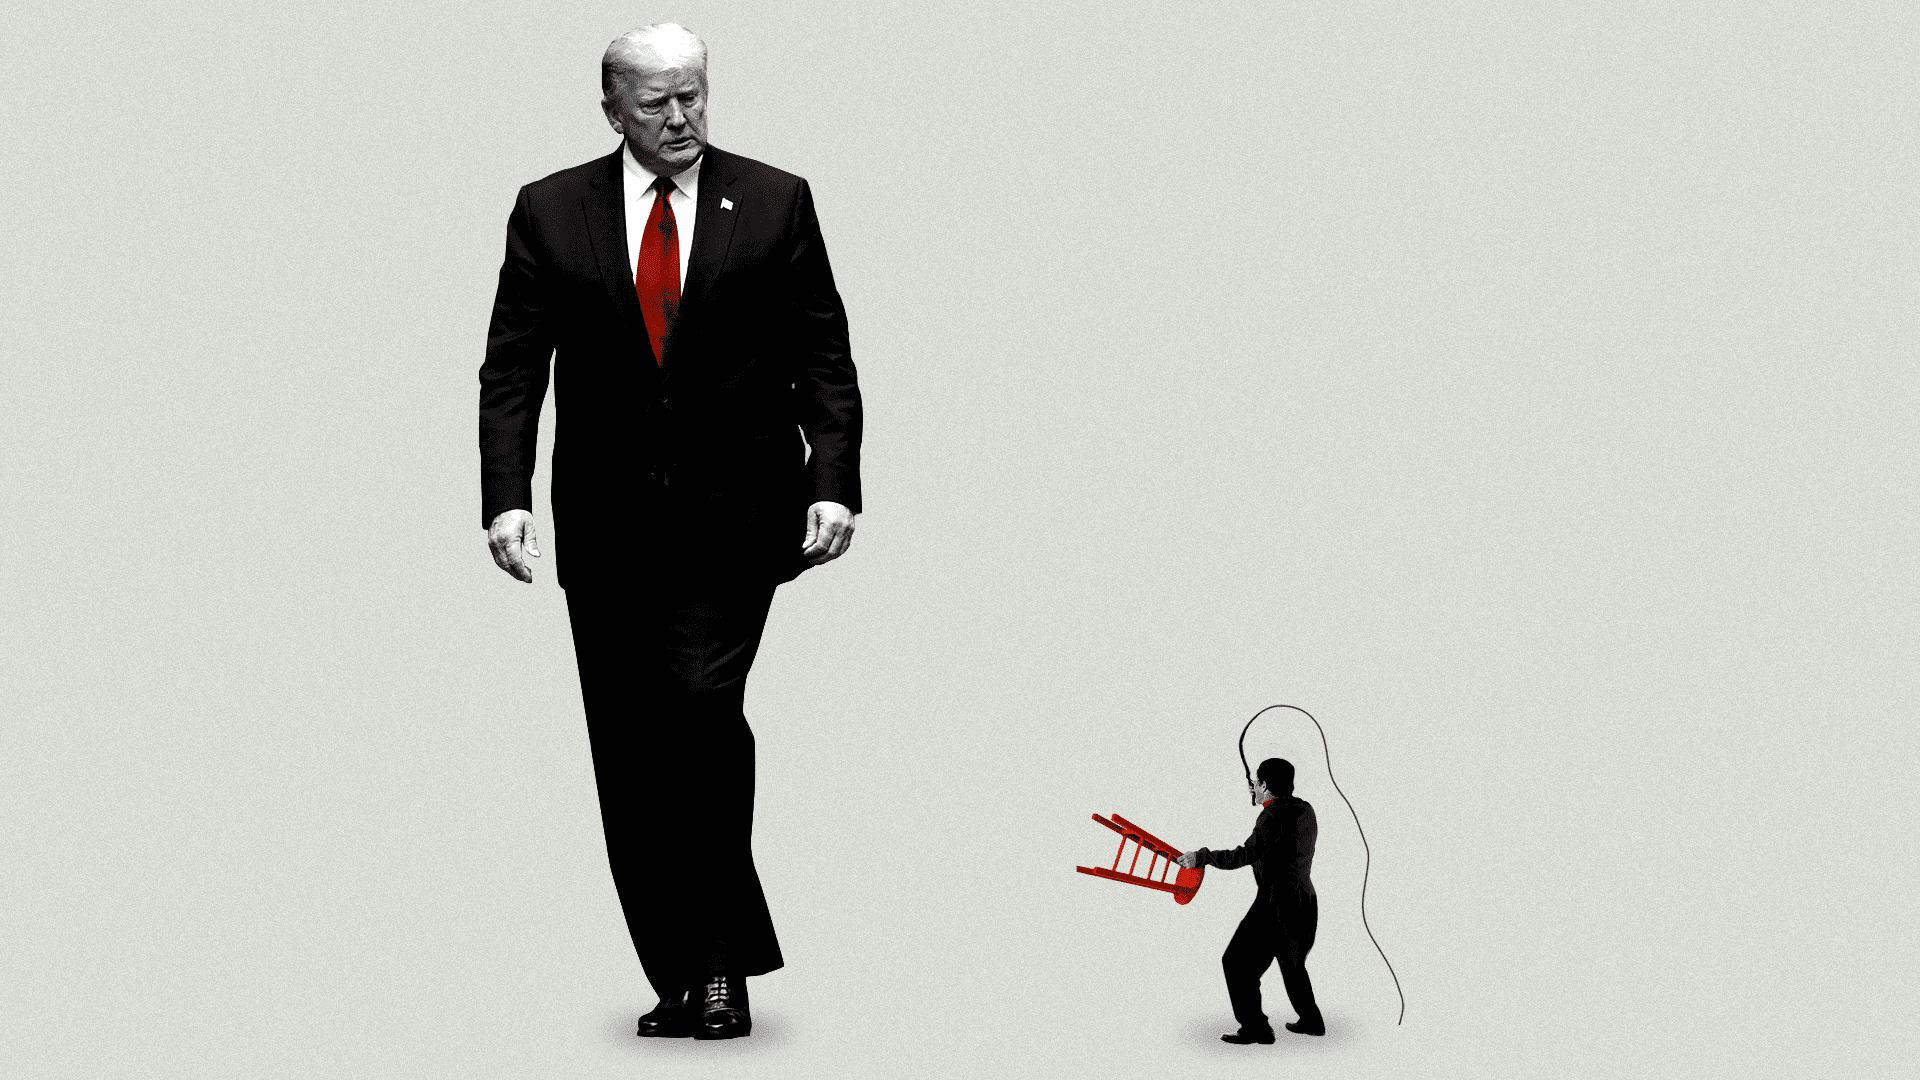 Trump standing very tall next to a shrunken depiction of a man holding a whip.